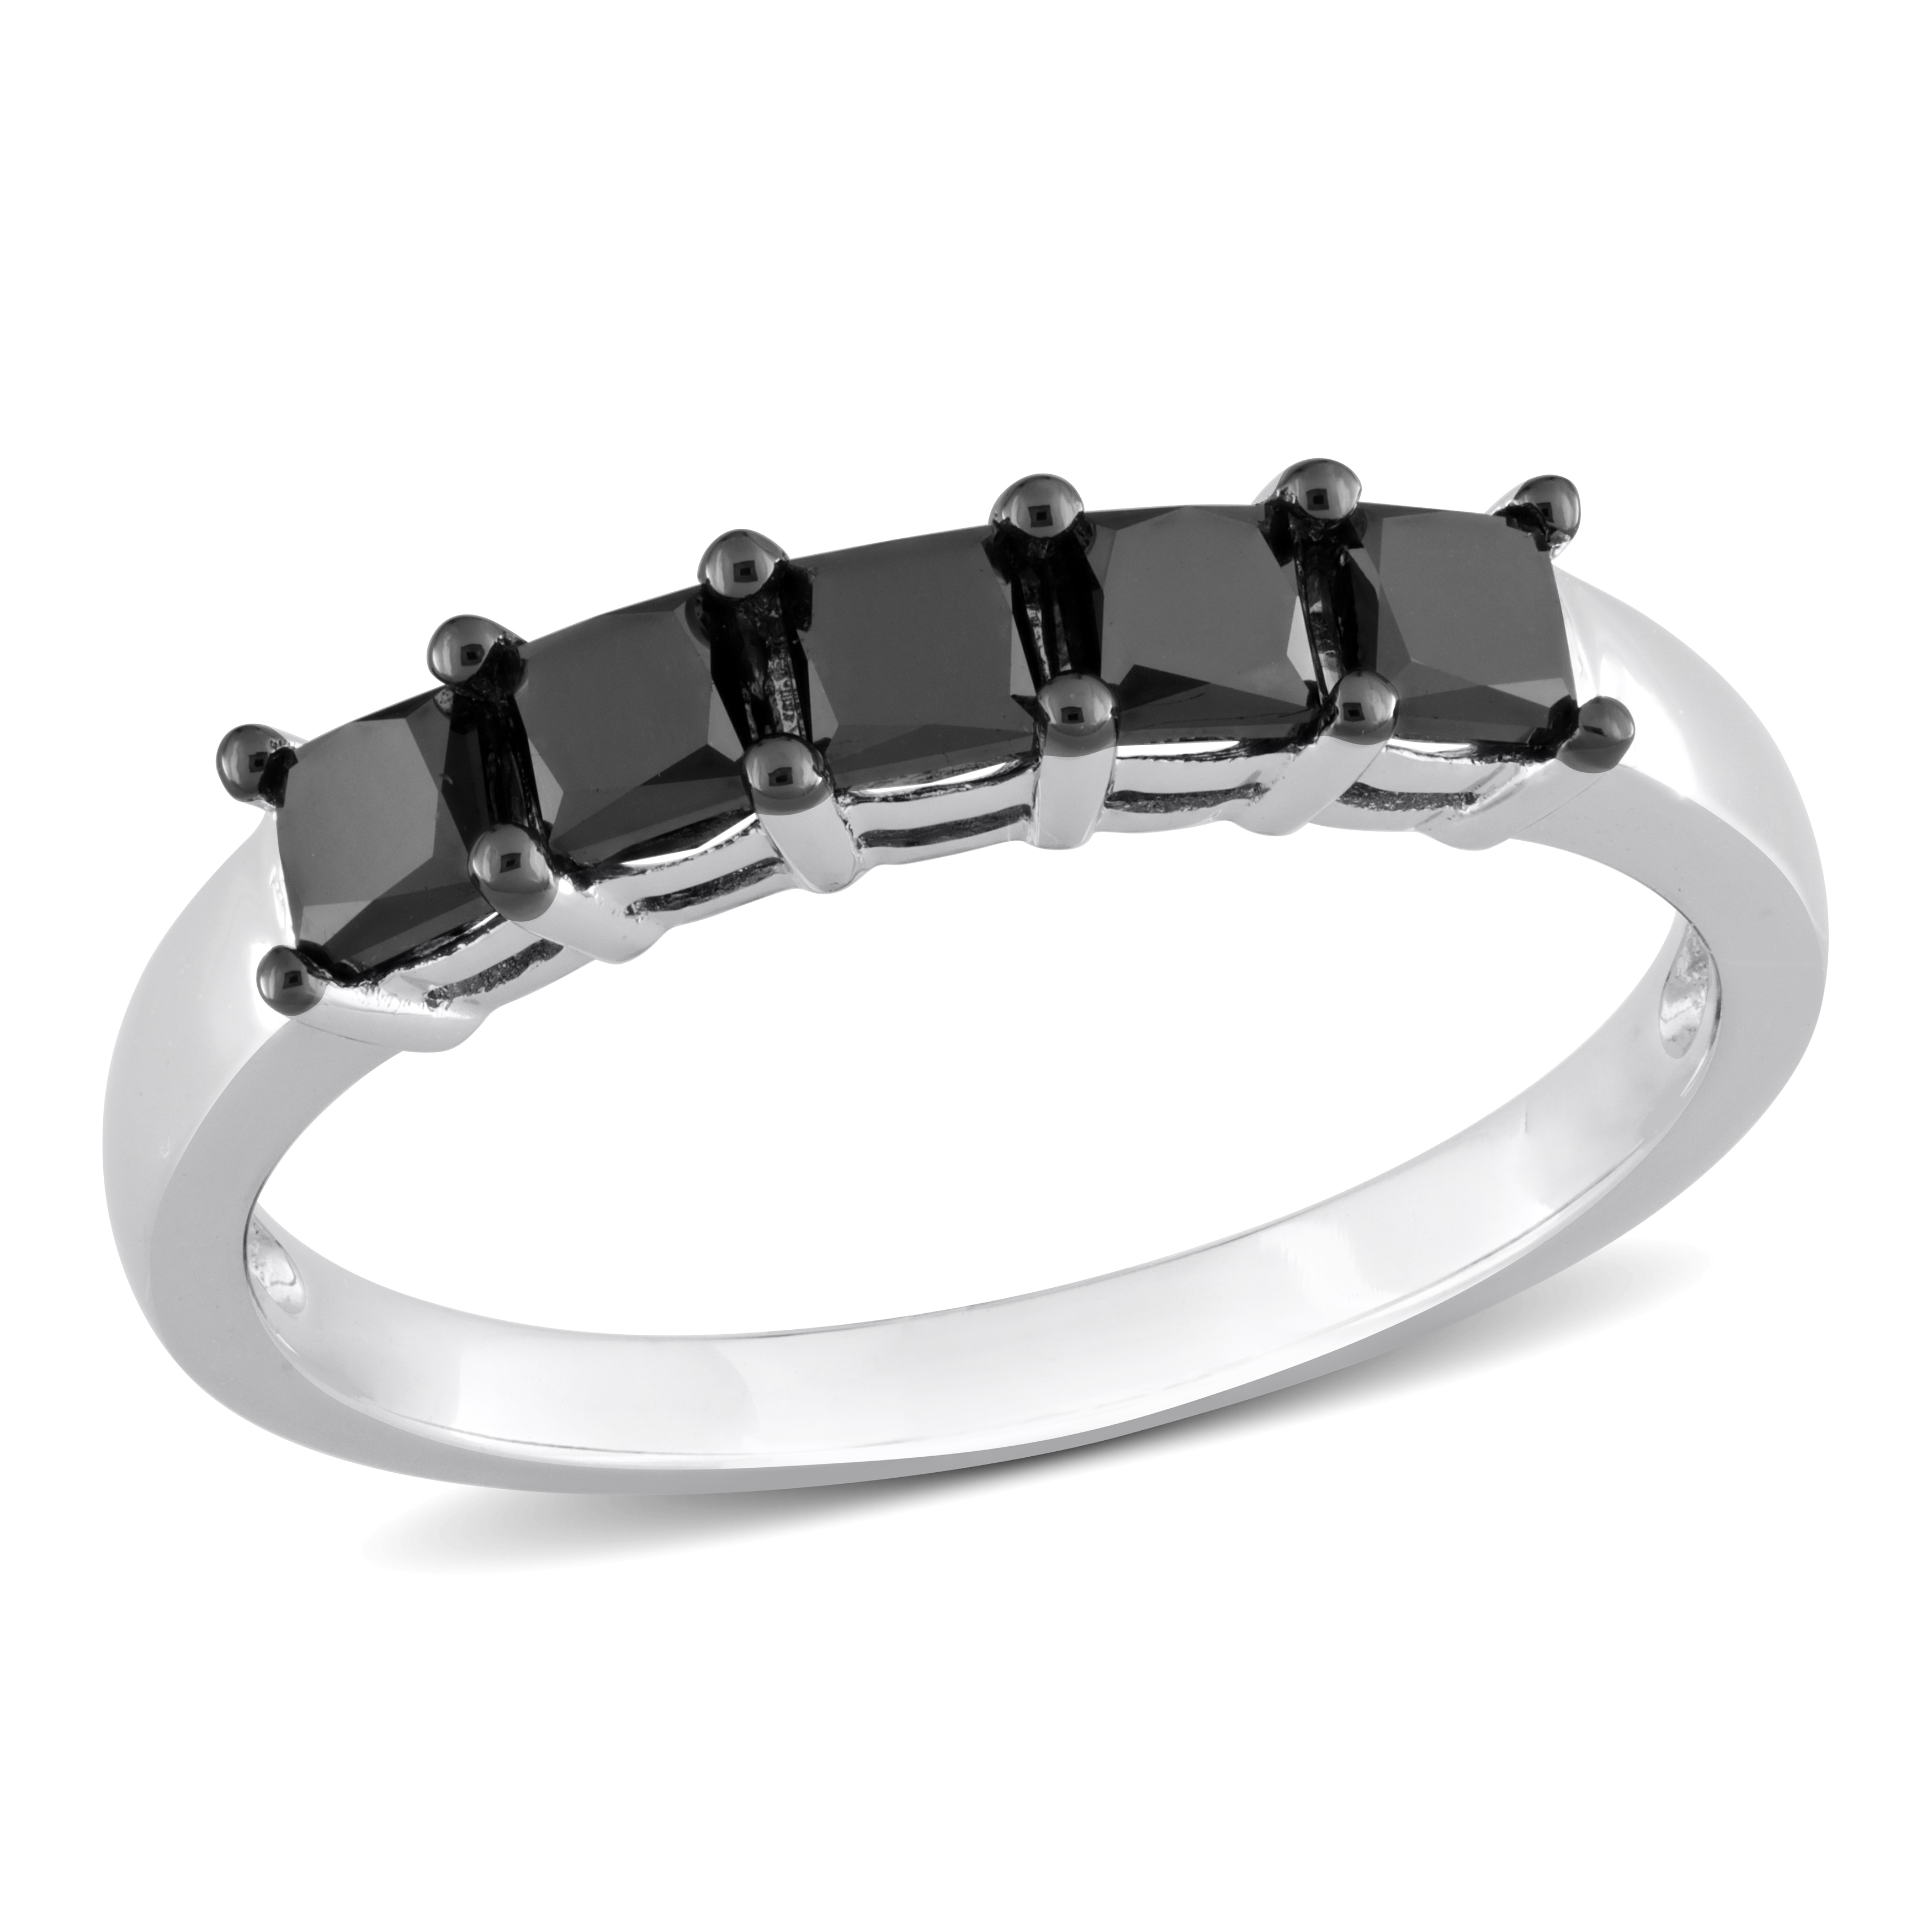 1 1/4 CT TDW Black and White and Princess-Cut Diamond 5-Stone Ring in 14k White Gold